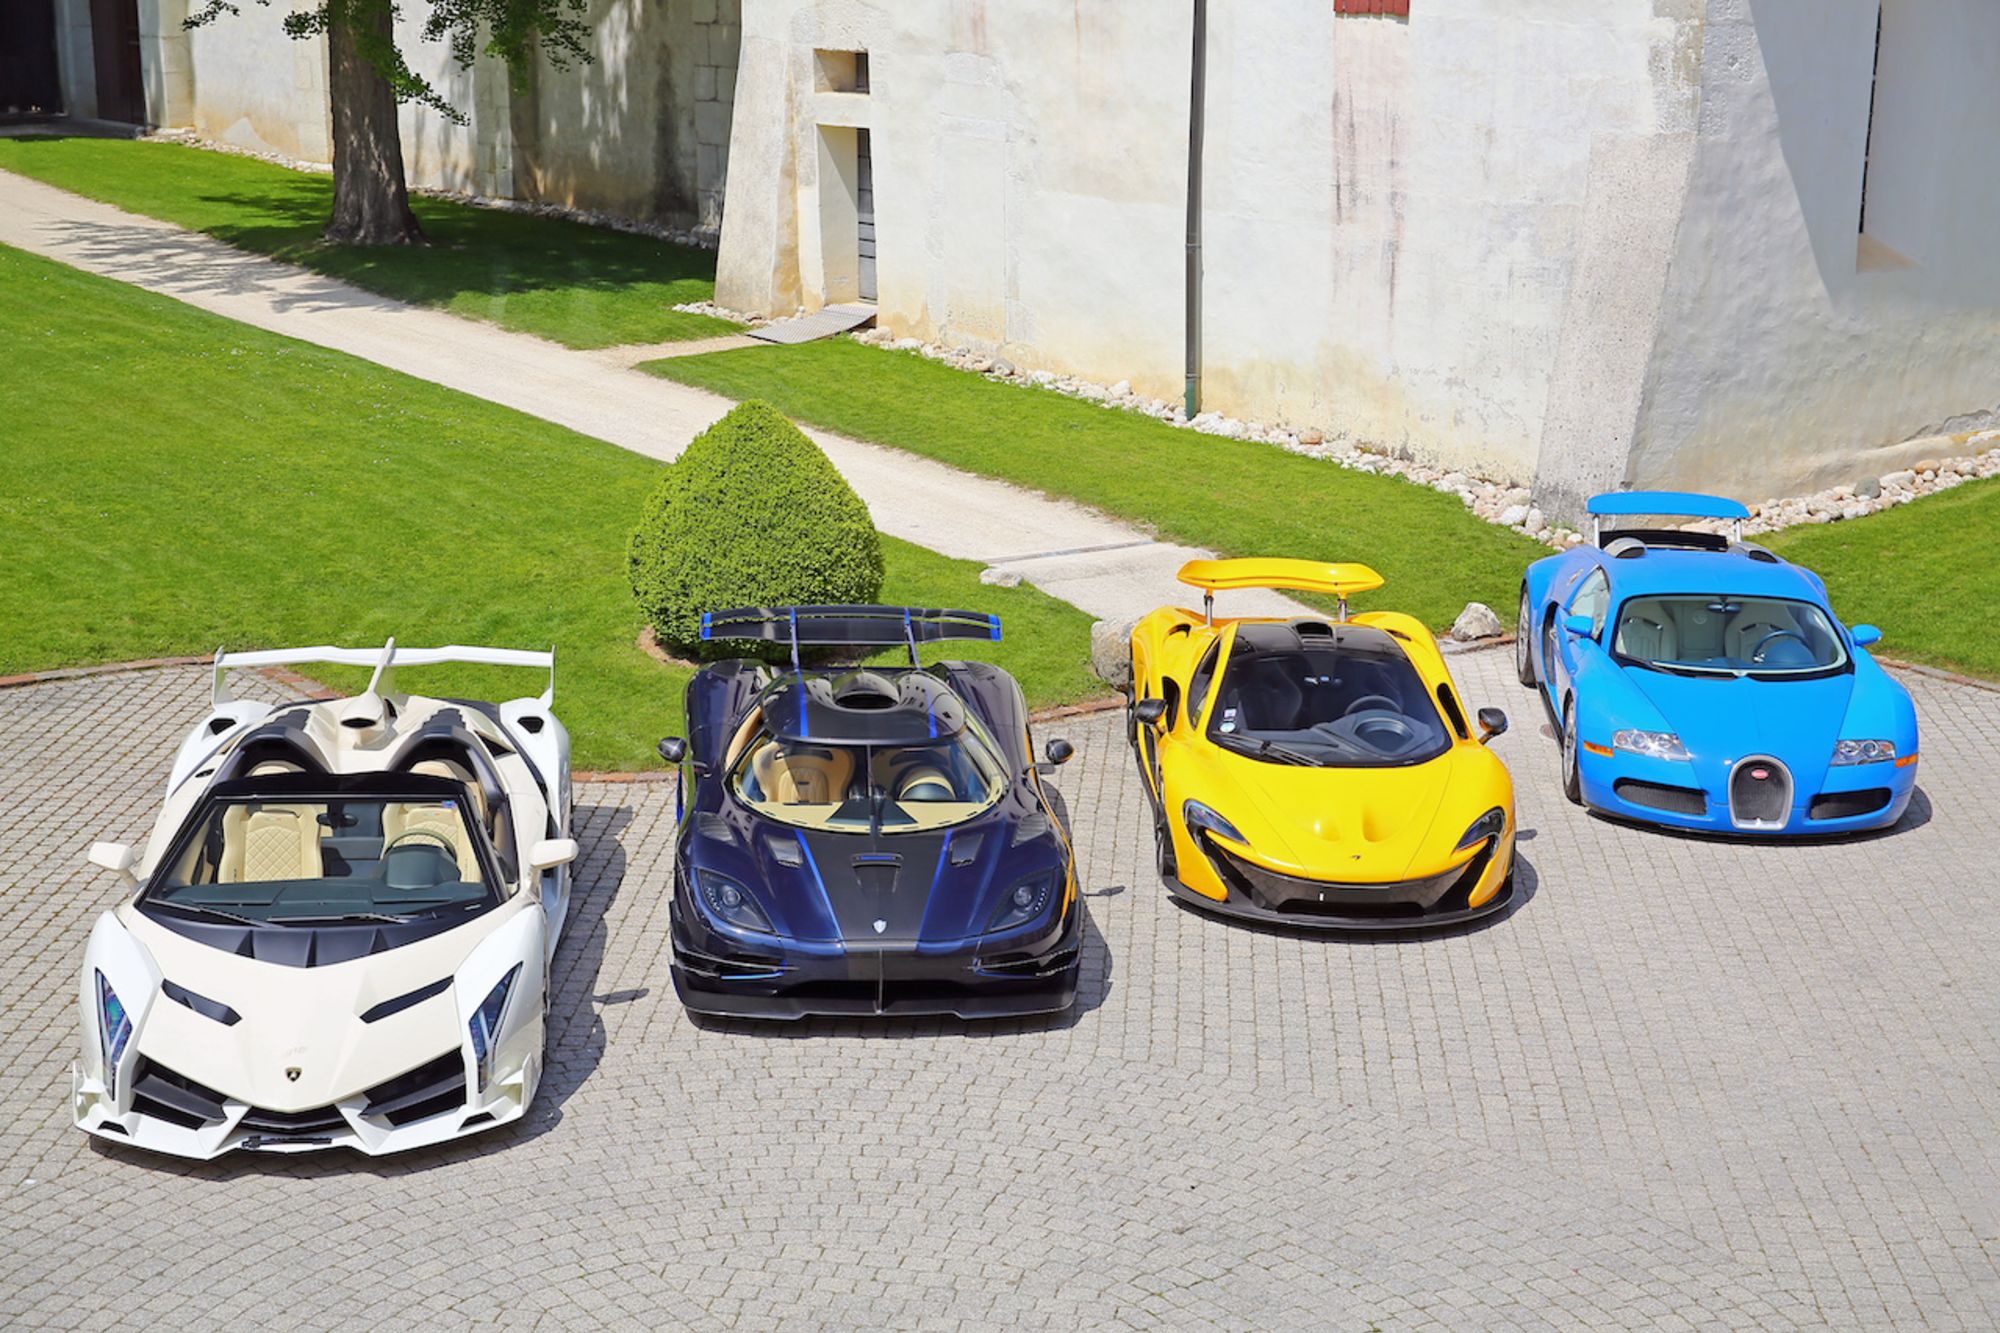 Politician's seized $13 million supercar collection to be auctioned